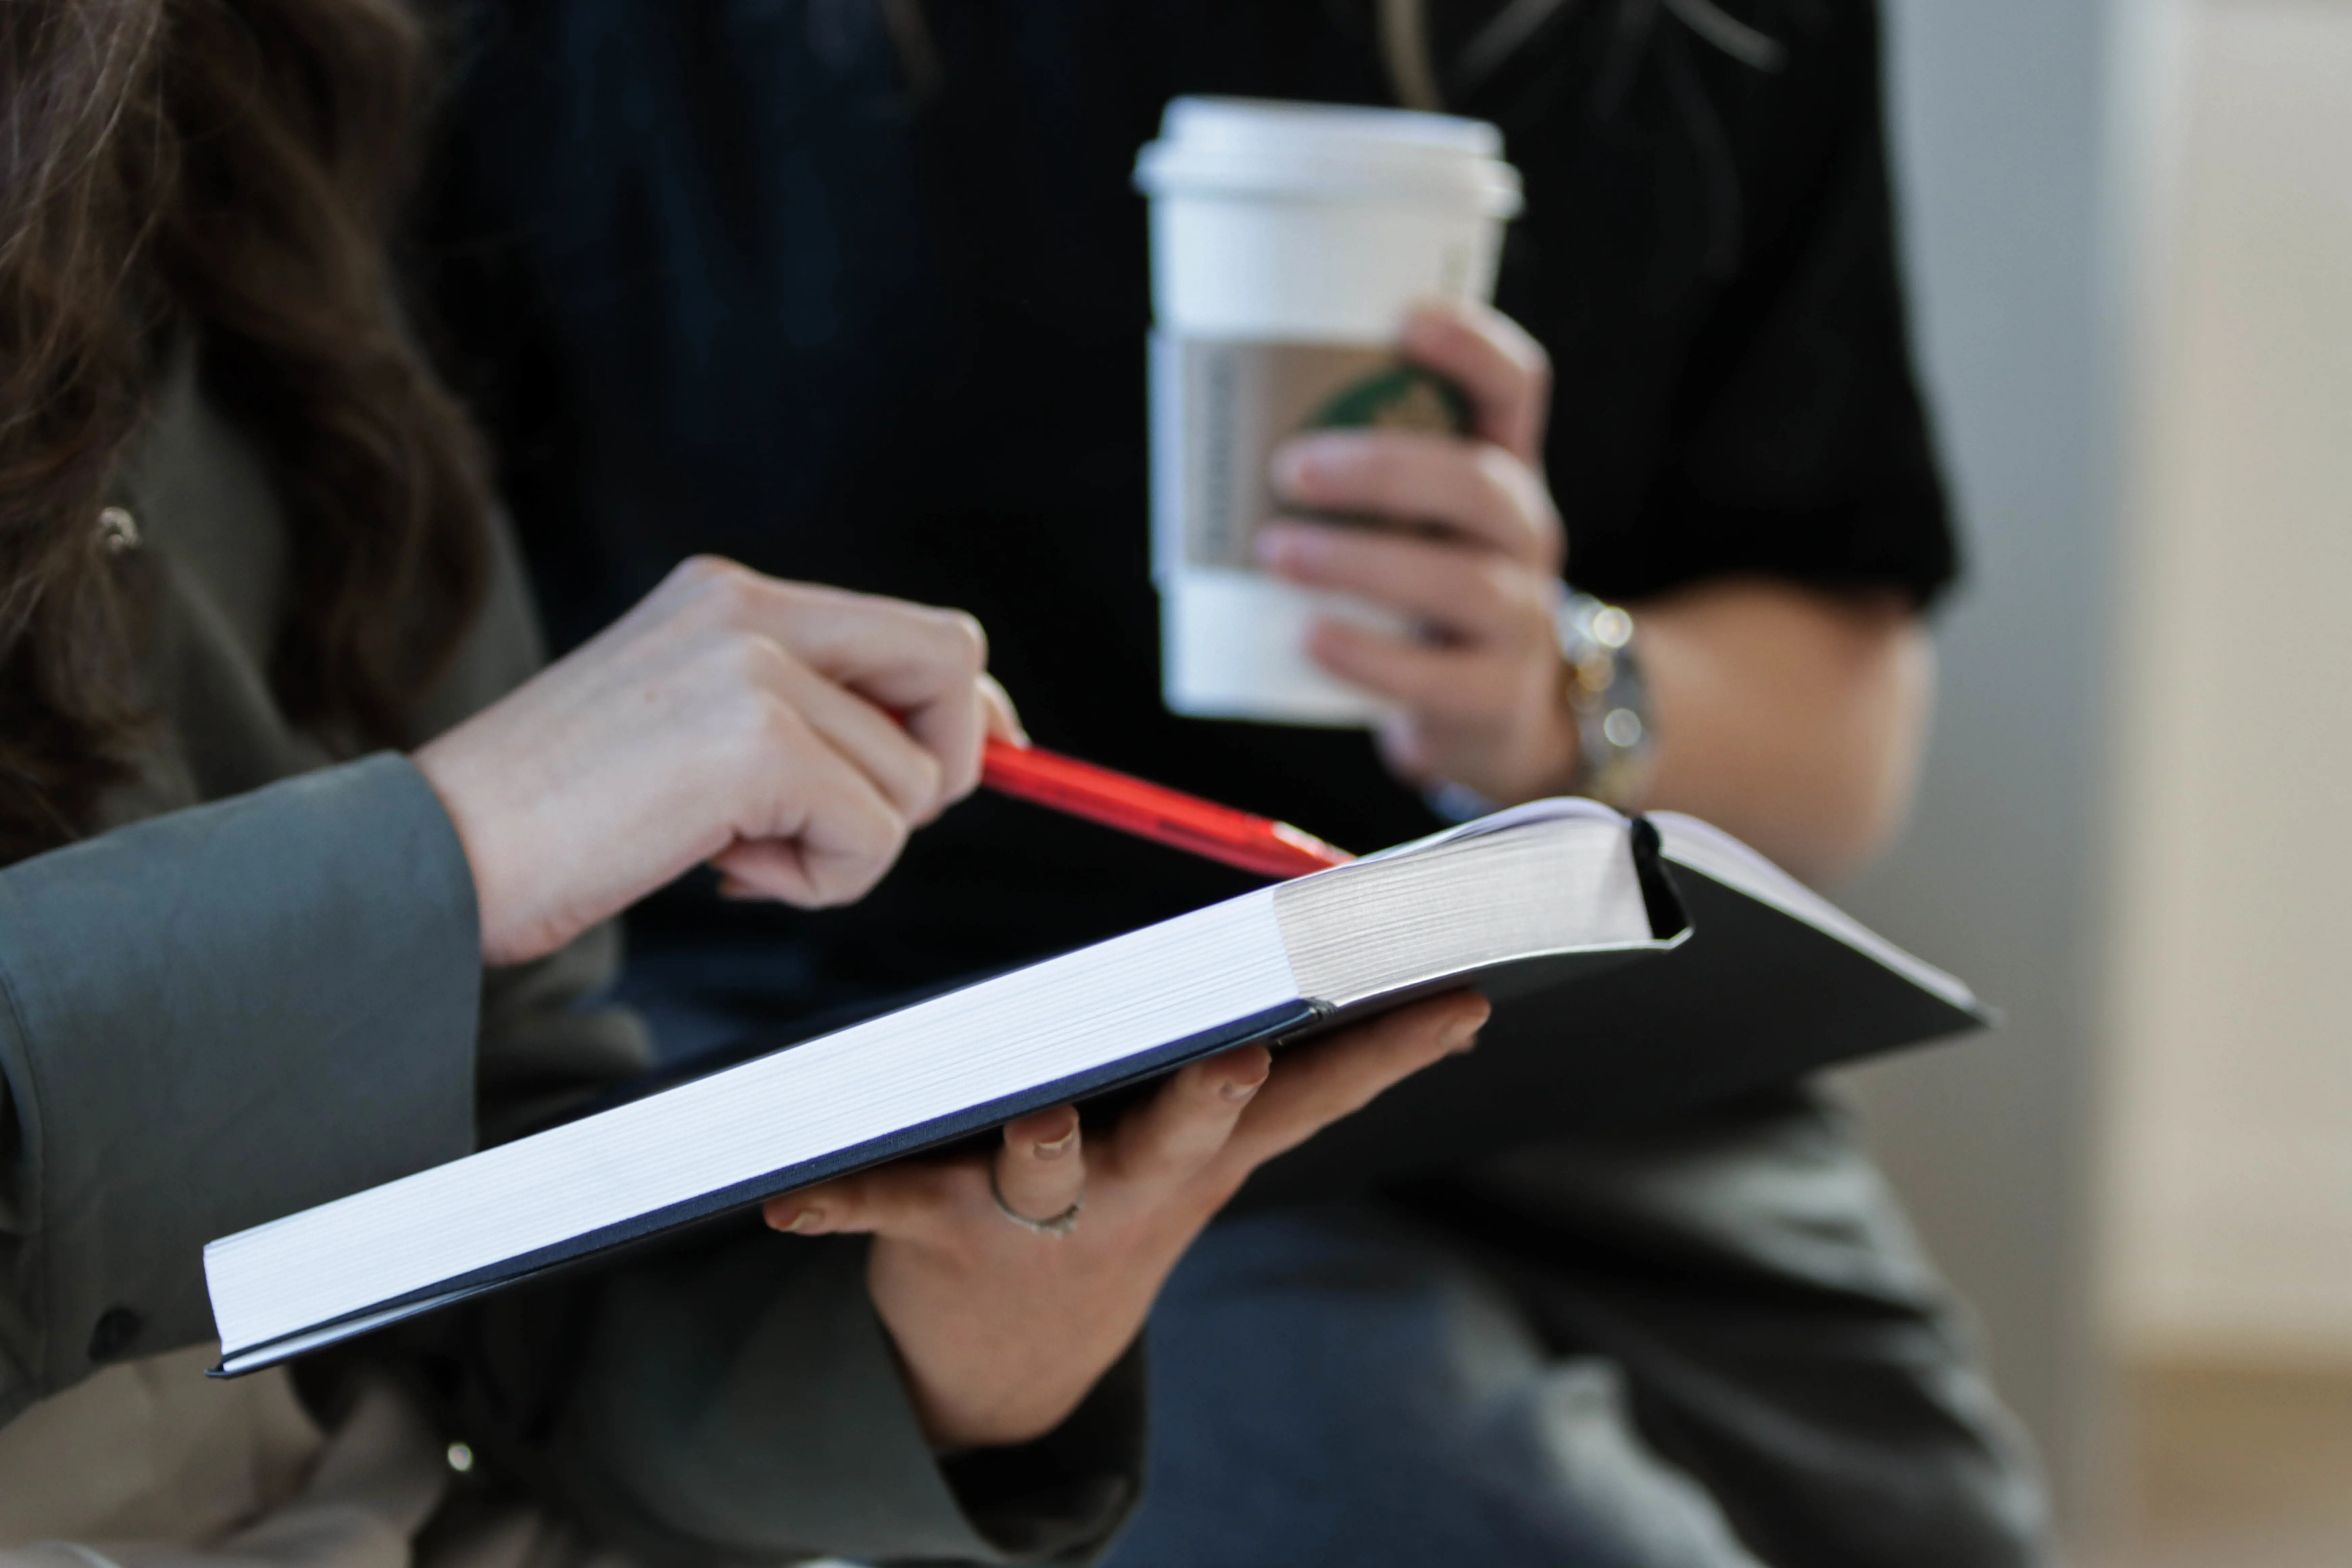 woman pointing at a hardcover book and a woman holding a coffee cup in the foreground 